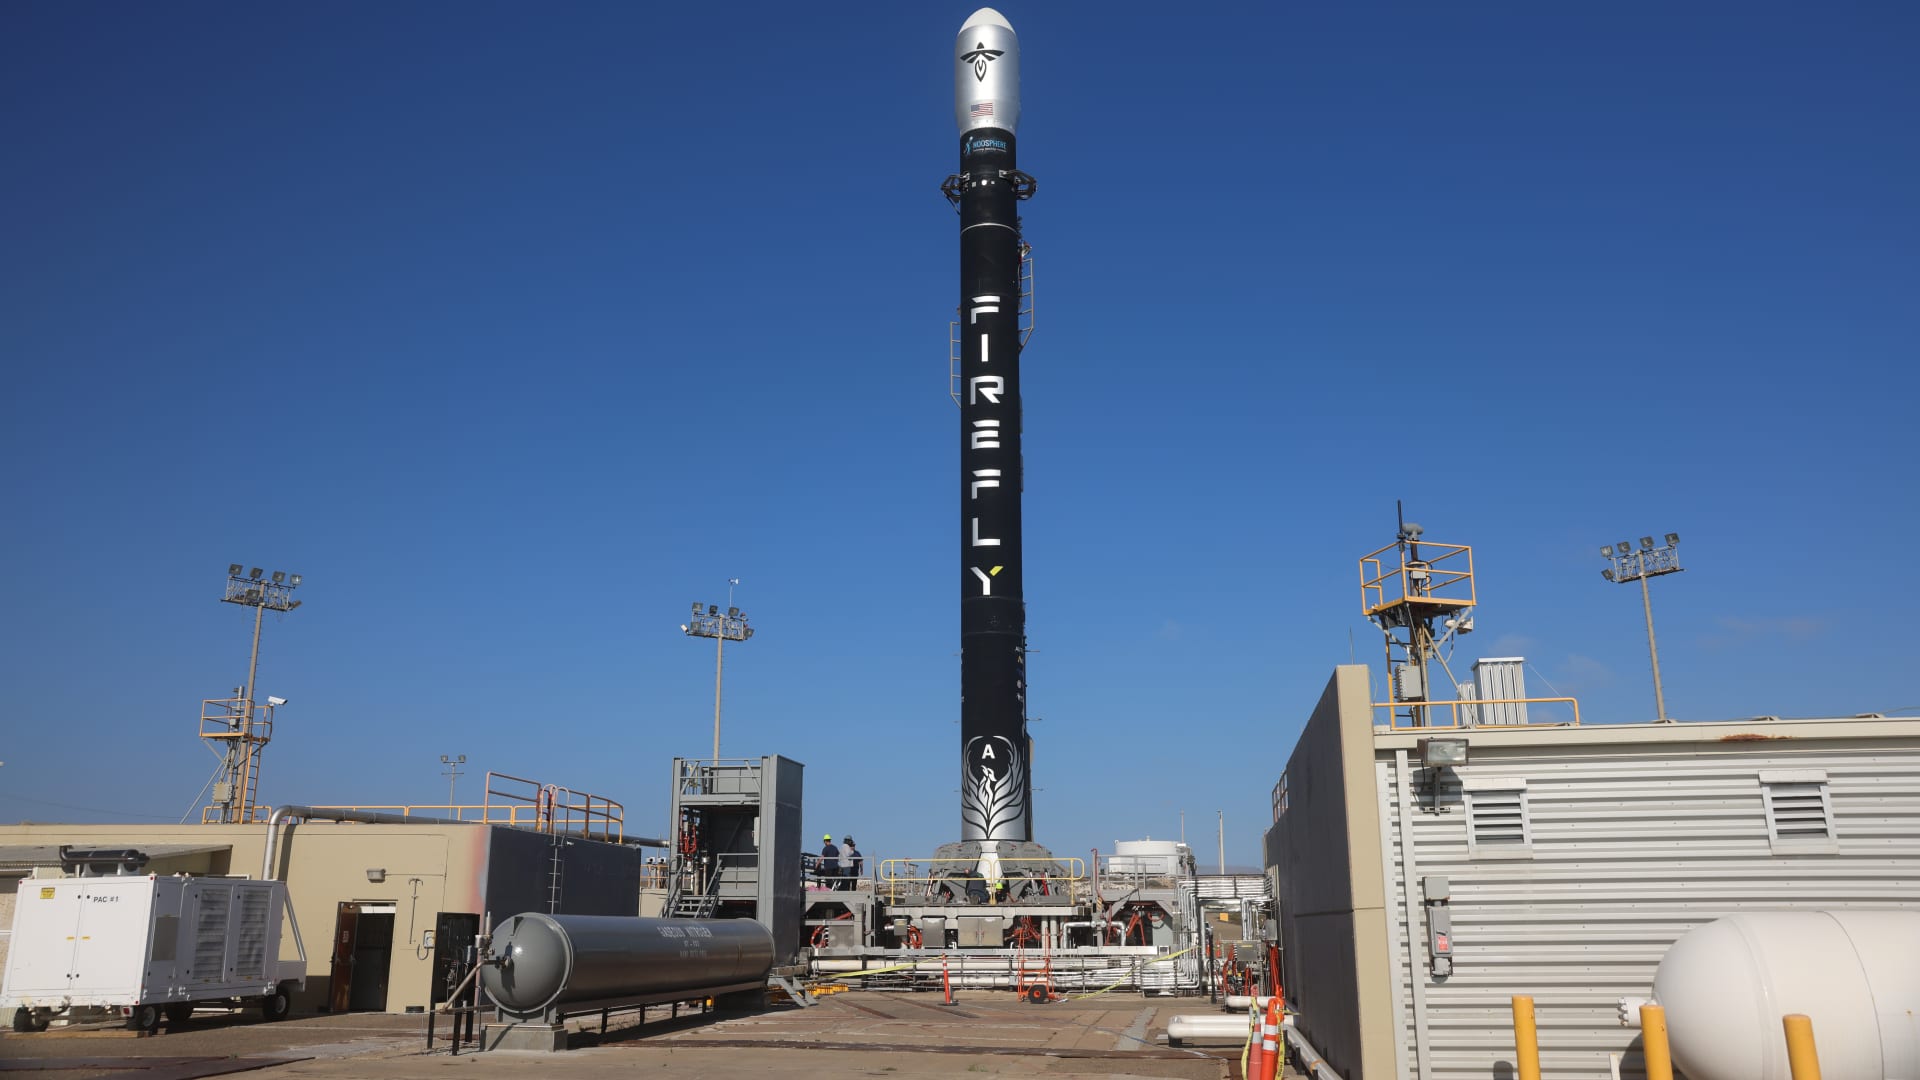 Firefly Aerospace's Alpha rocket on the launch pad at Vandenberg Space Force Base.